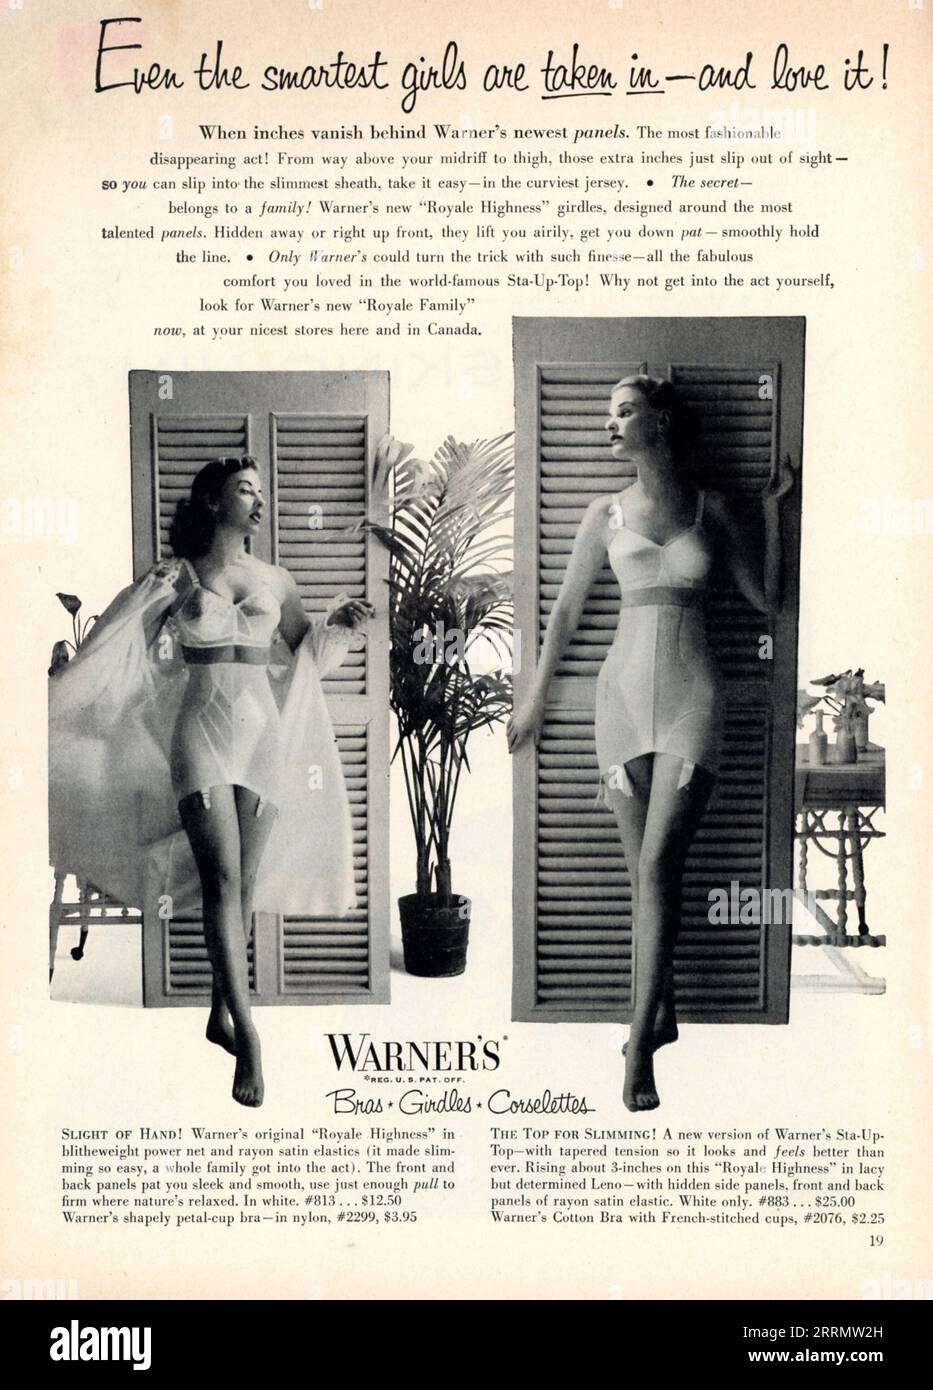  Playtex Fabric-Lined Invisible Girdles 1953 Vintage Antique  Advertisement: Prints: Posters & Prints